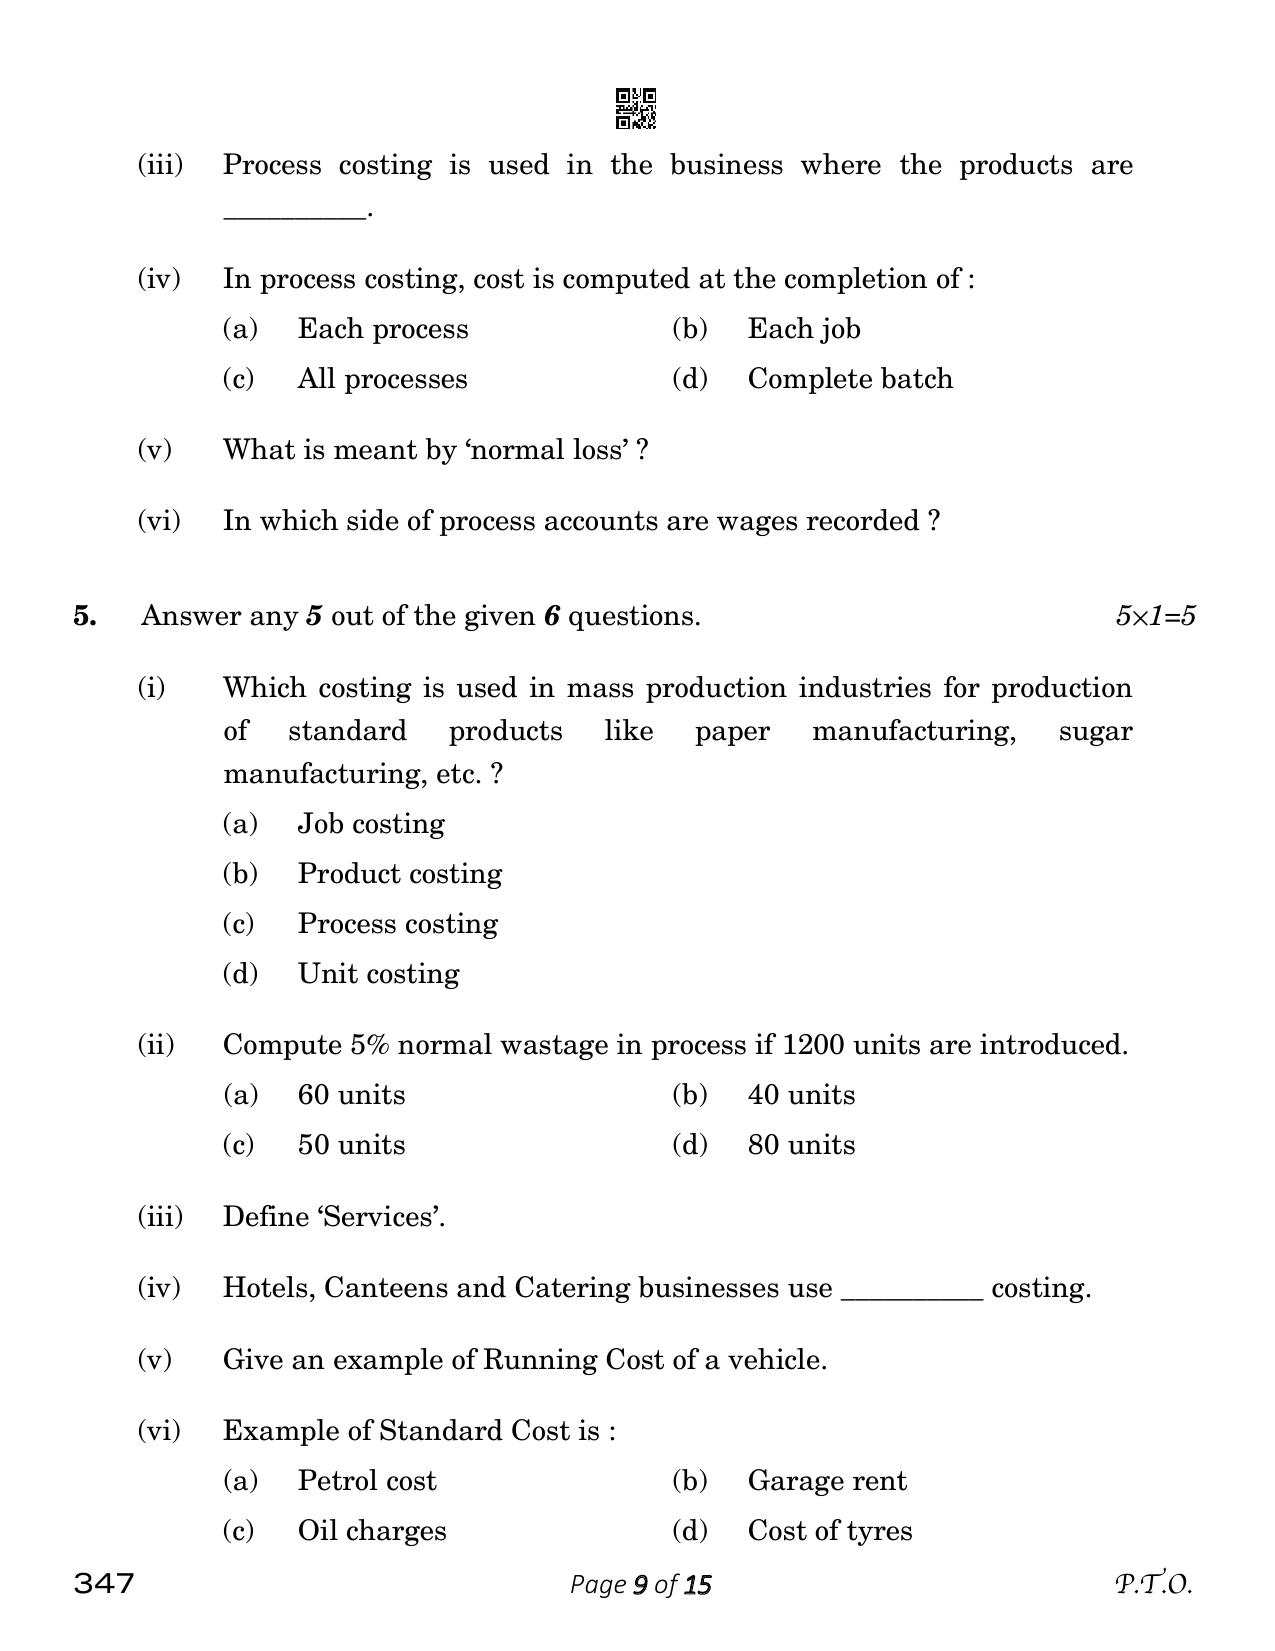 CBSE Class 12 Cost Accounting (Compartment) 2023 Question Paper - Page 9